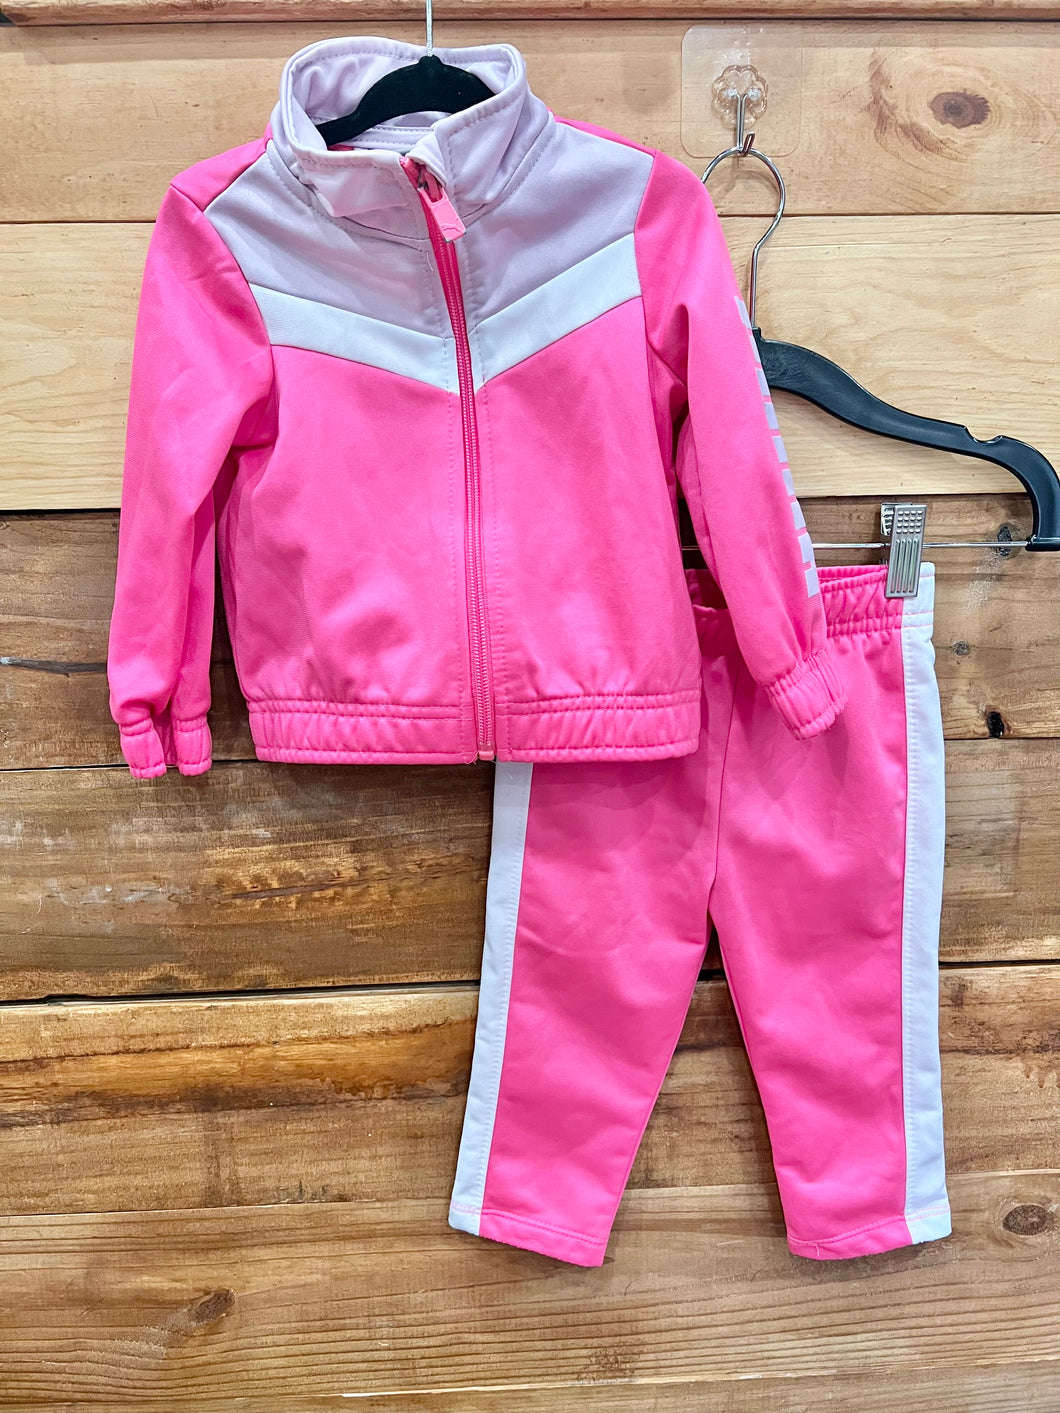 Puma Pink 2pc Outfit Size 12m